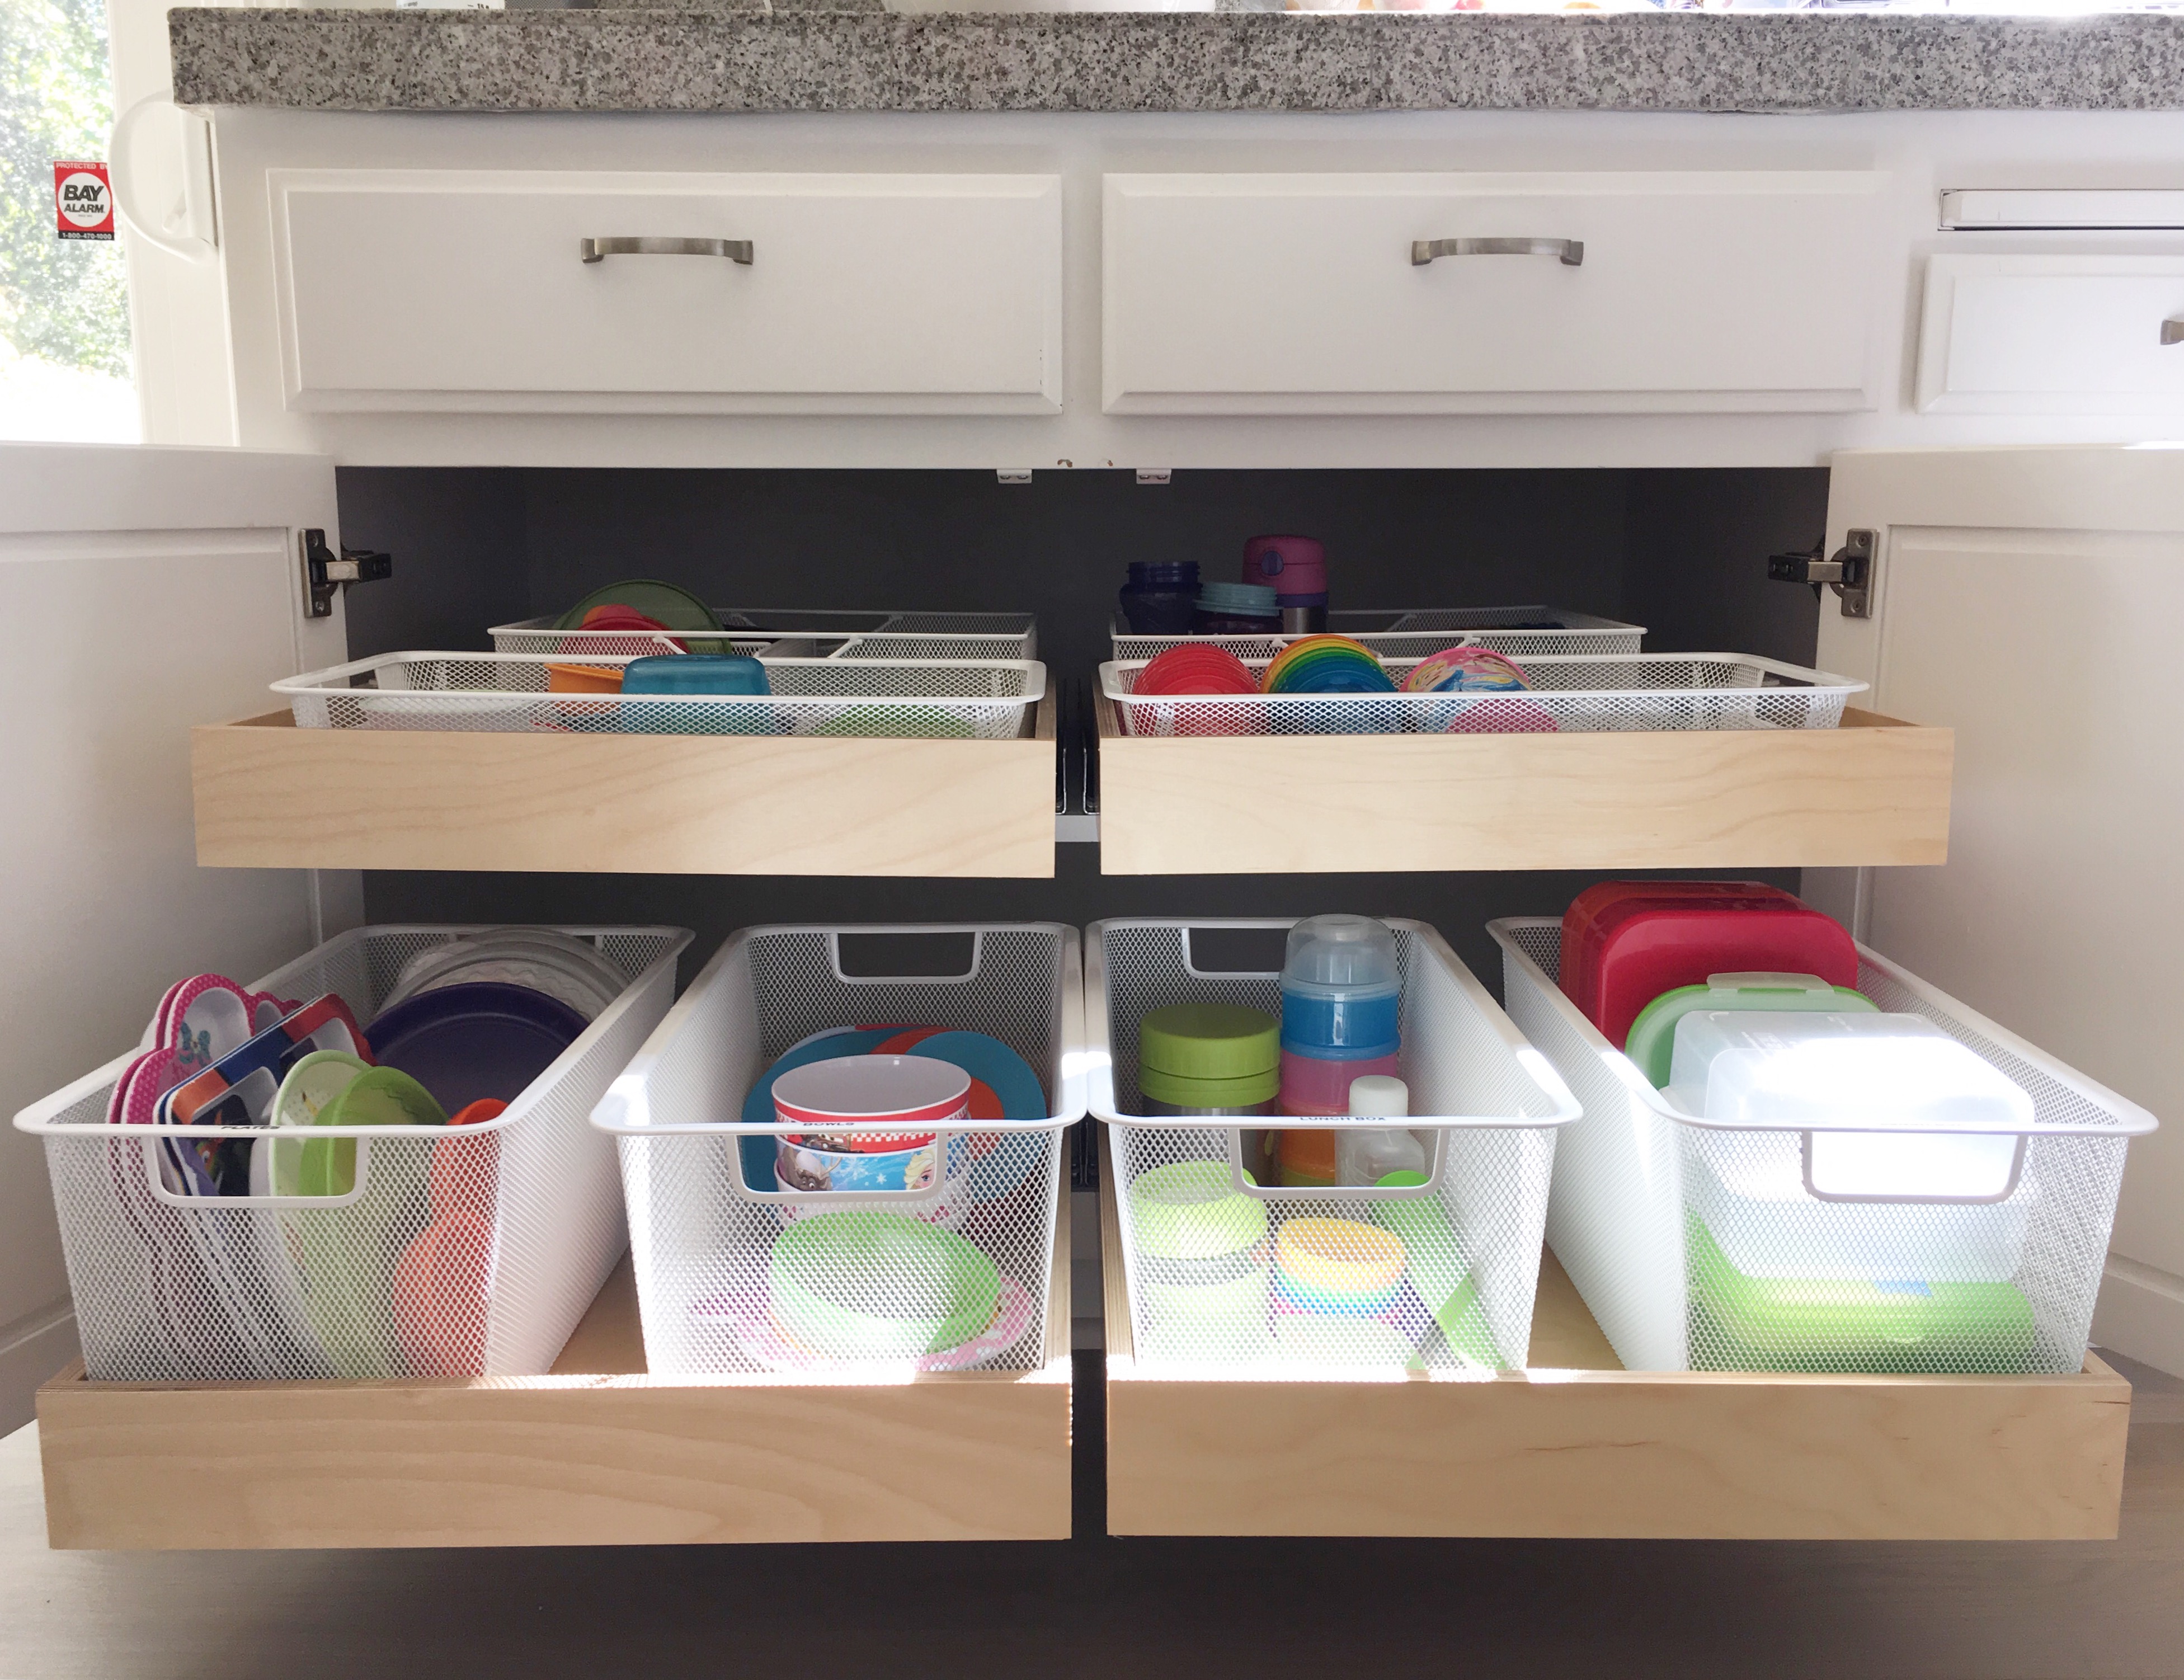 How to organize dishes for kids so they can find what they need